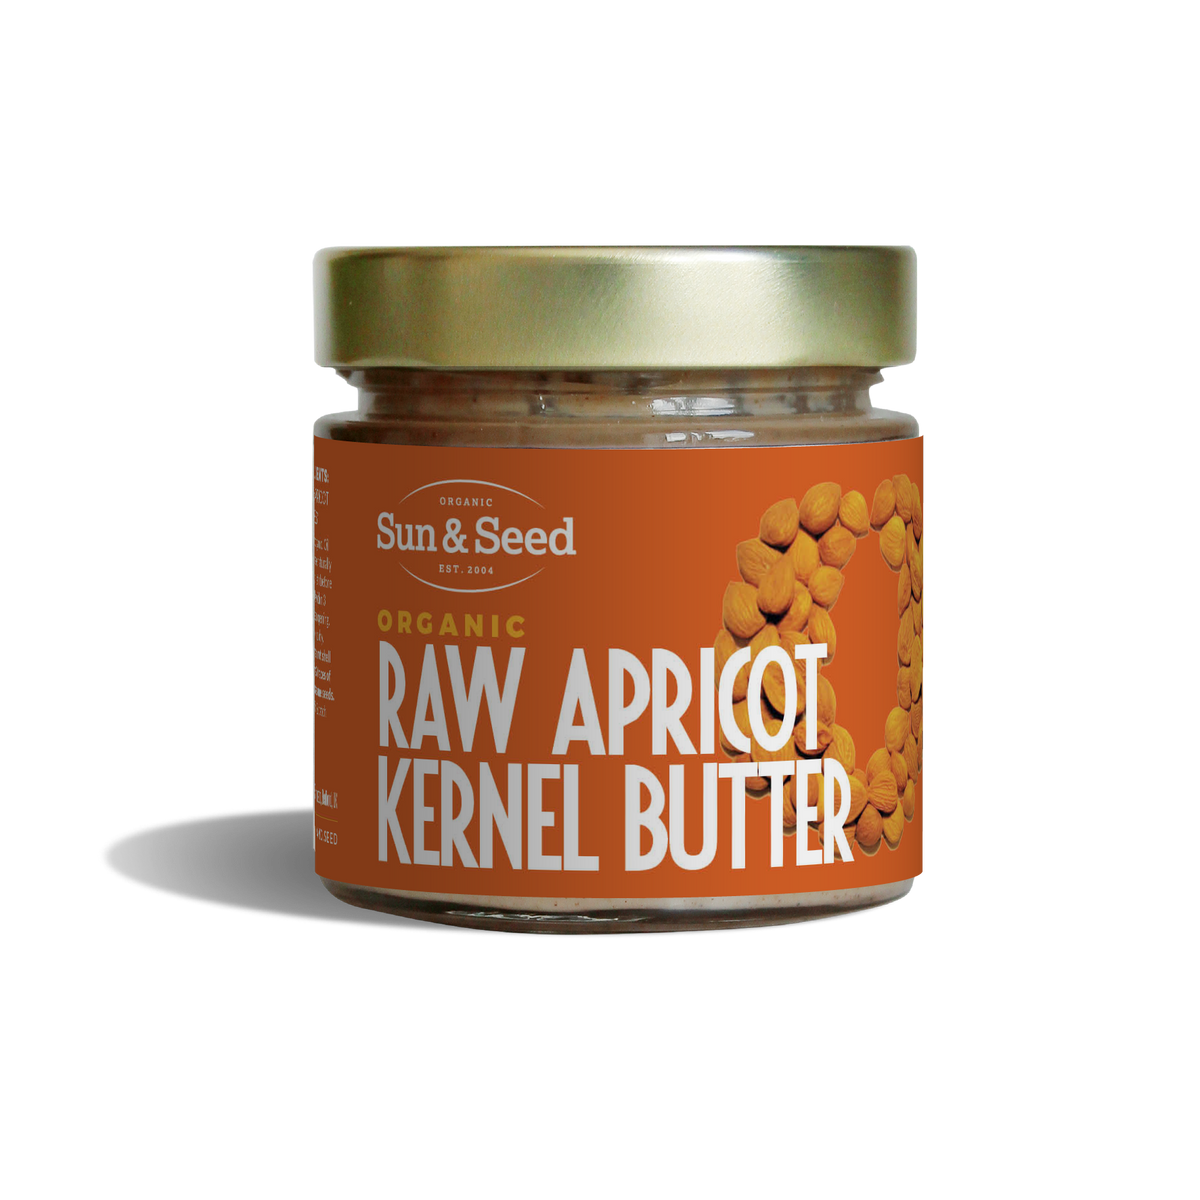 Apricot Kernel Butter - Raw and Organic (200g)